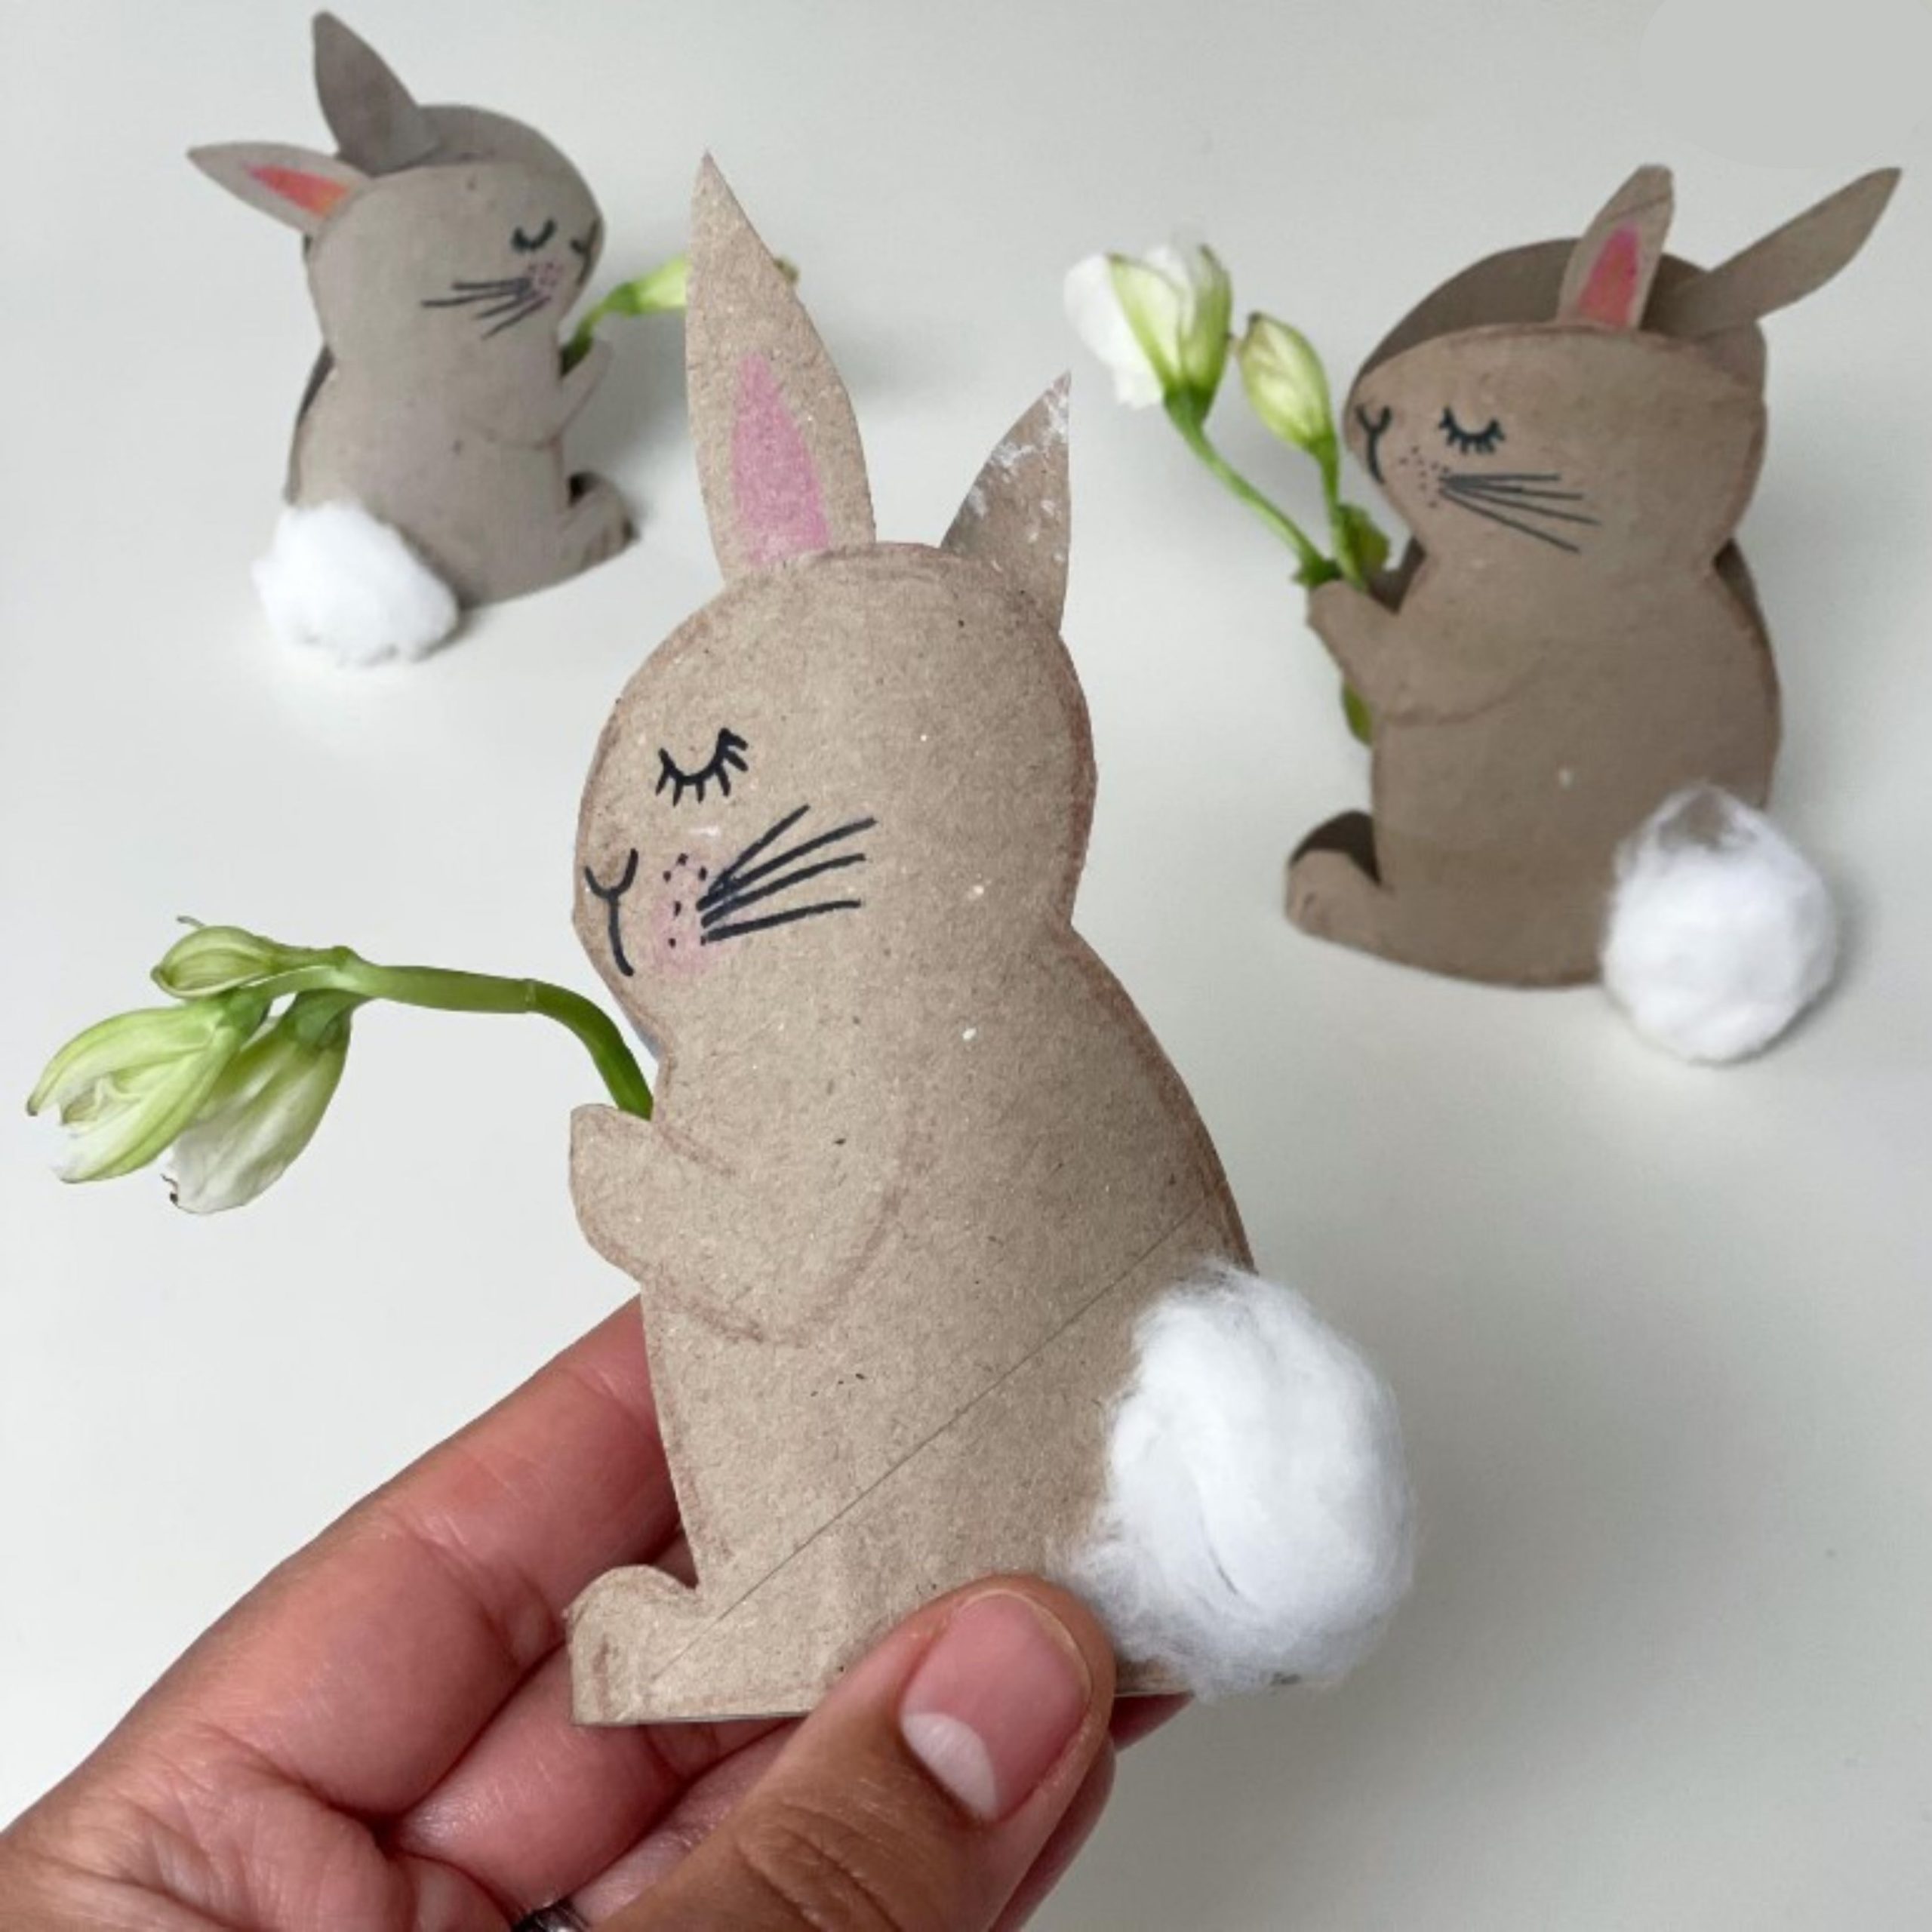 bunnies made from cardboard holding flowers